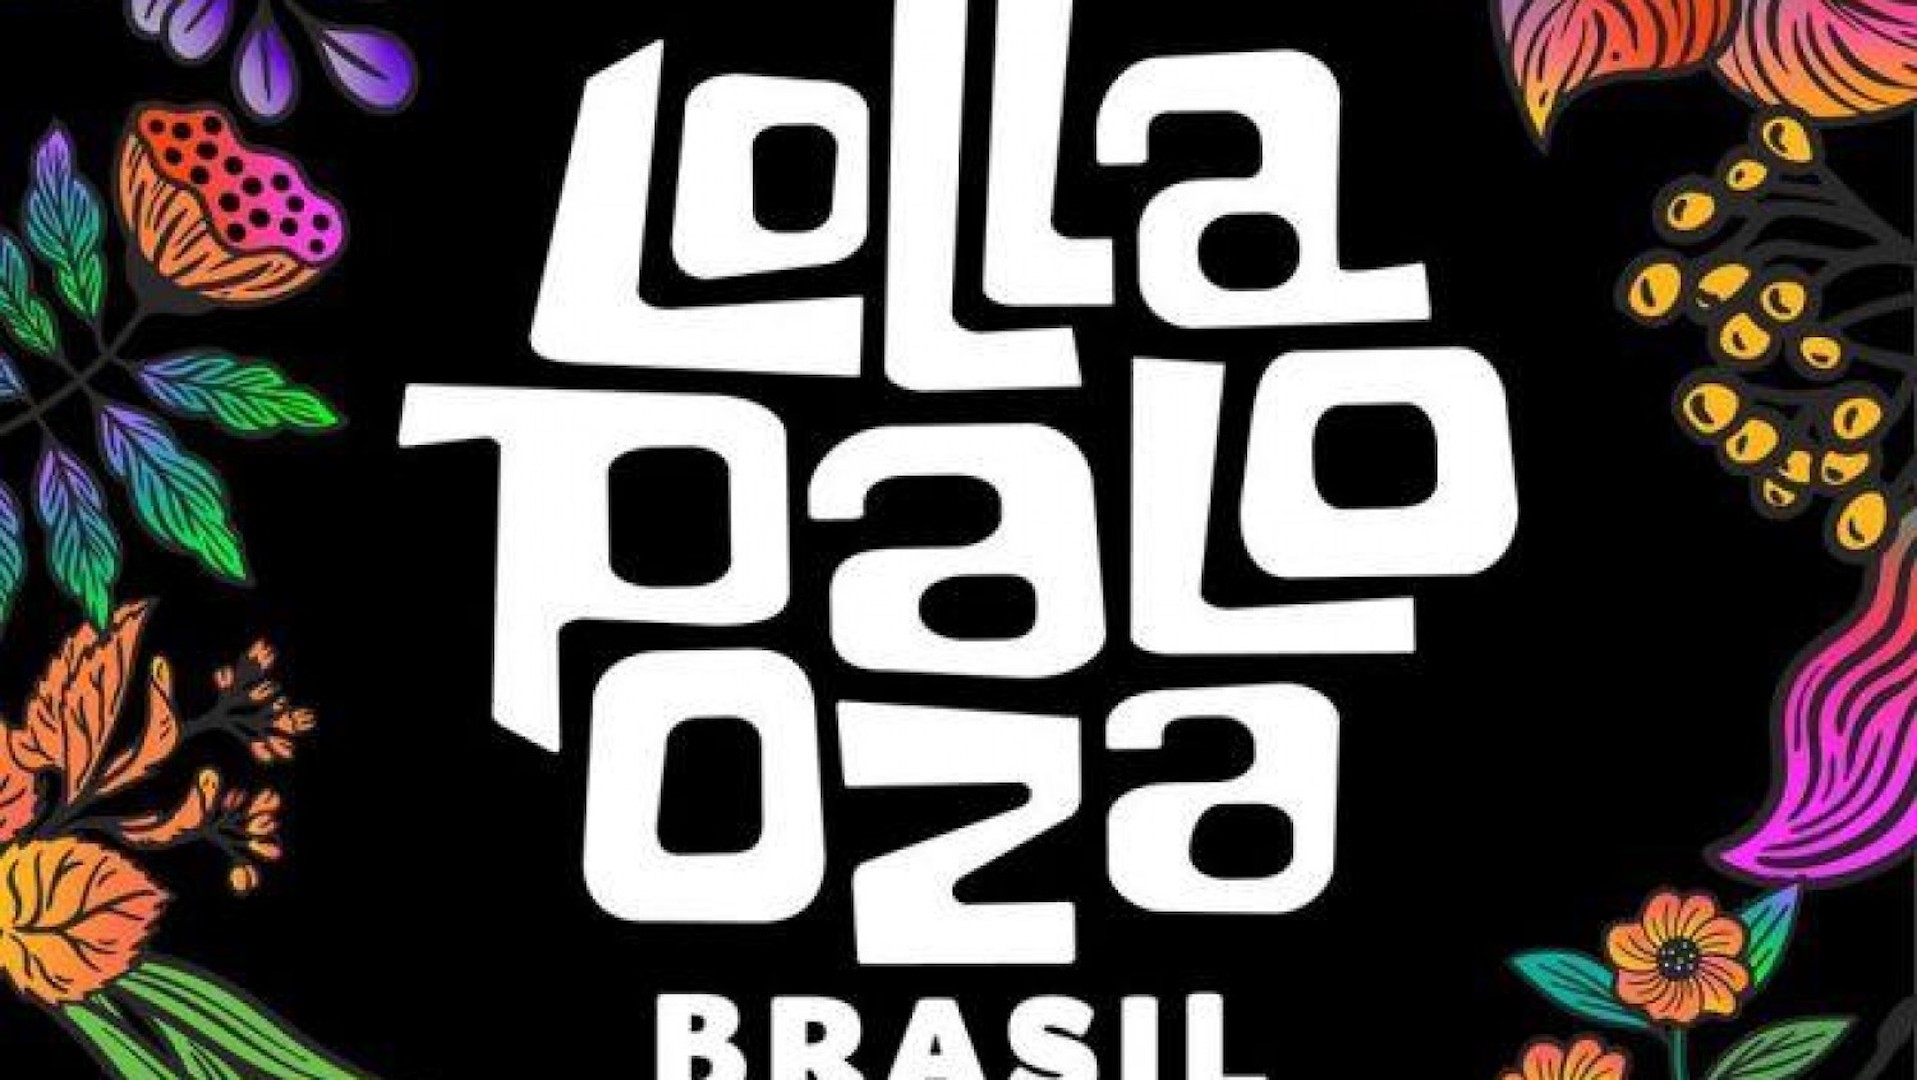 Brazil,Lollapalooza Brasil has been rescheduled to take place in São Paulo in early December.